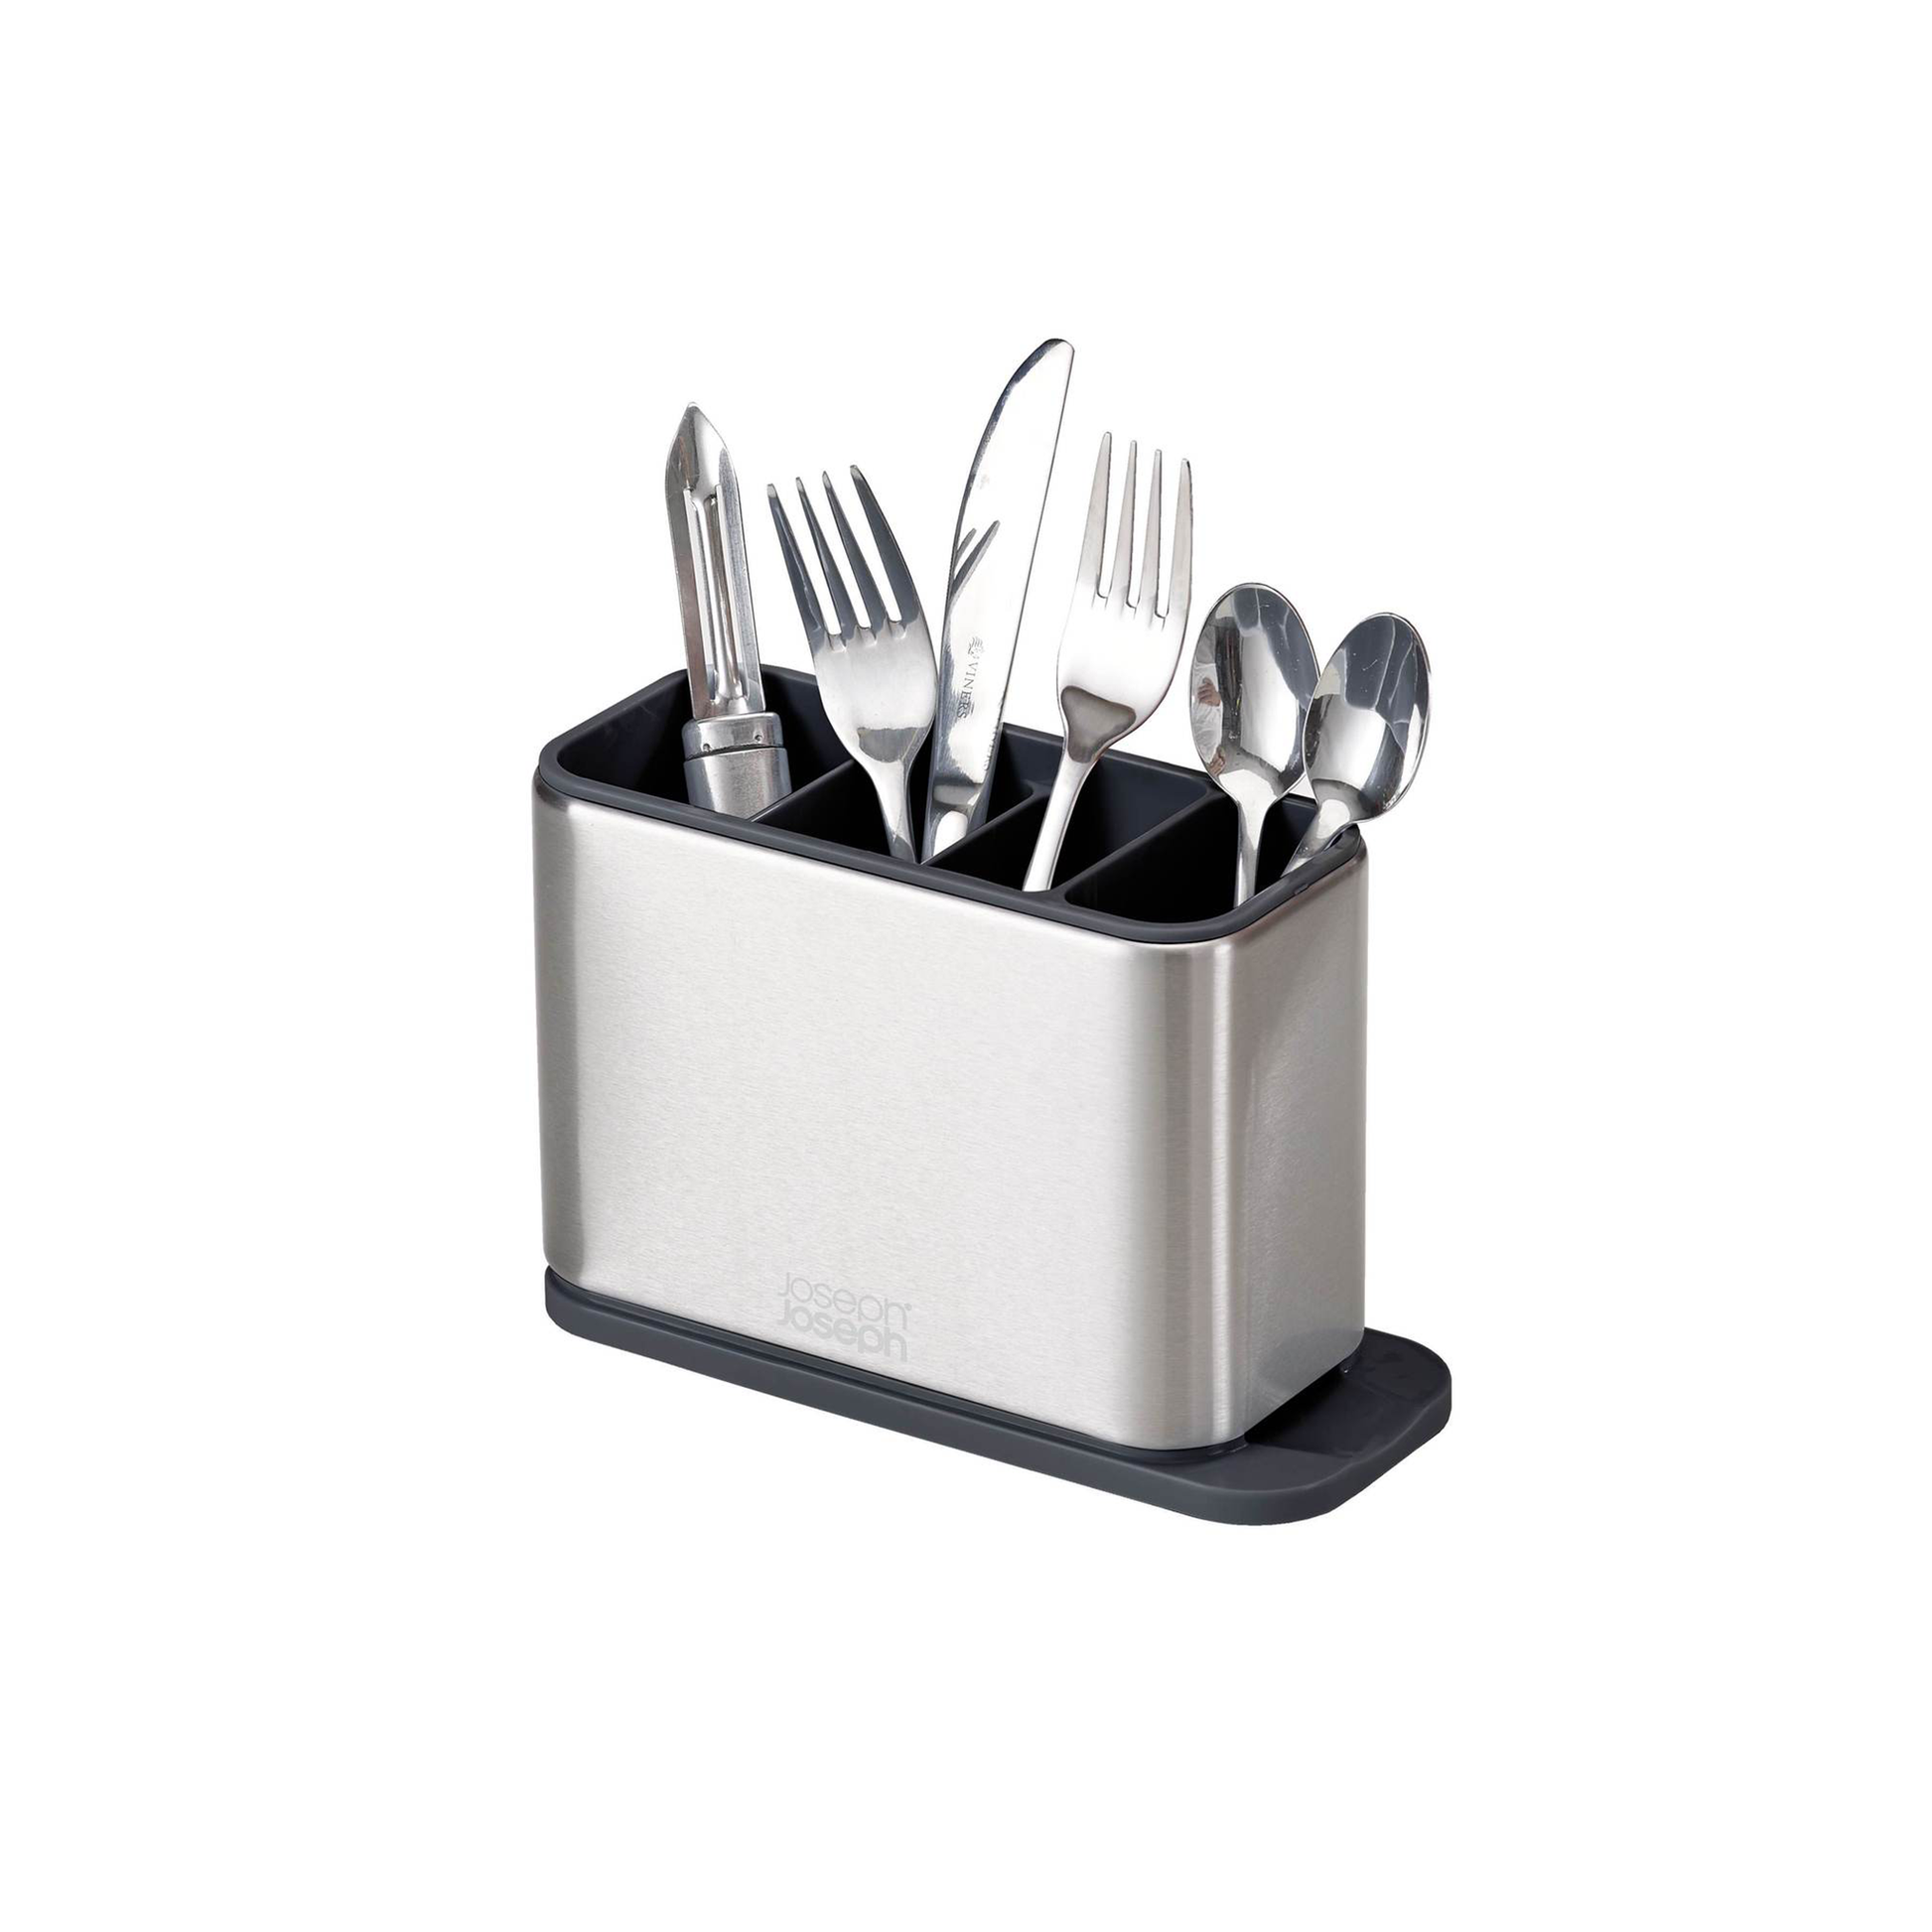 a stainless steel cutlery drainer holding a vegatble peeler, forks, a knife and some tea spoons